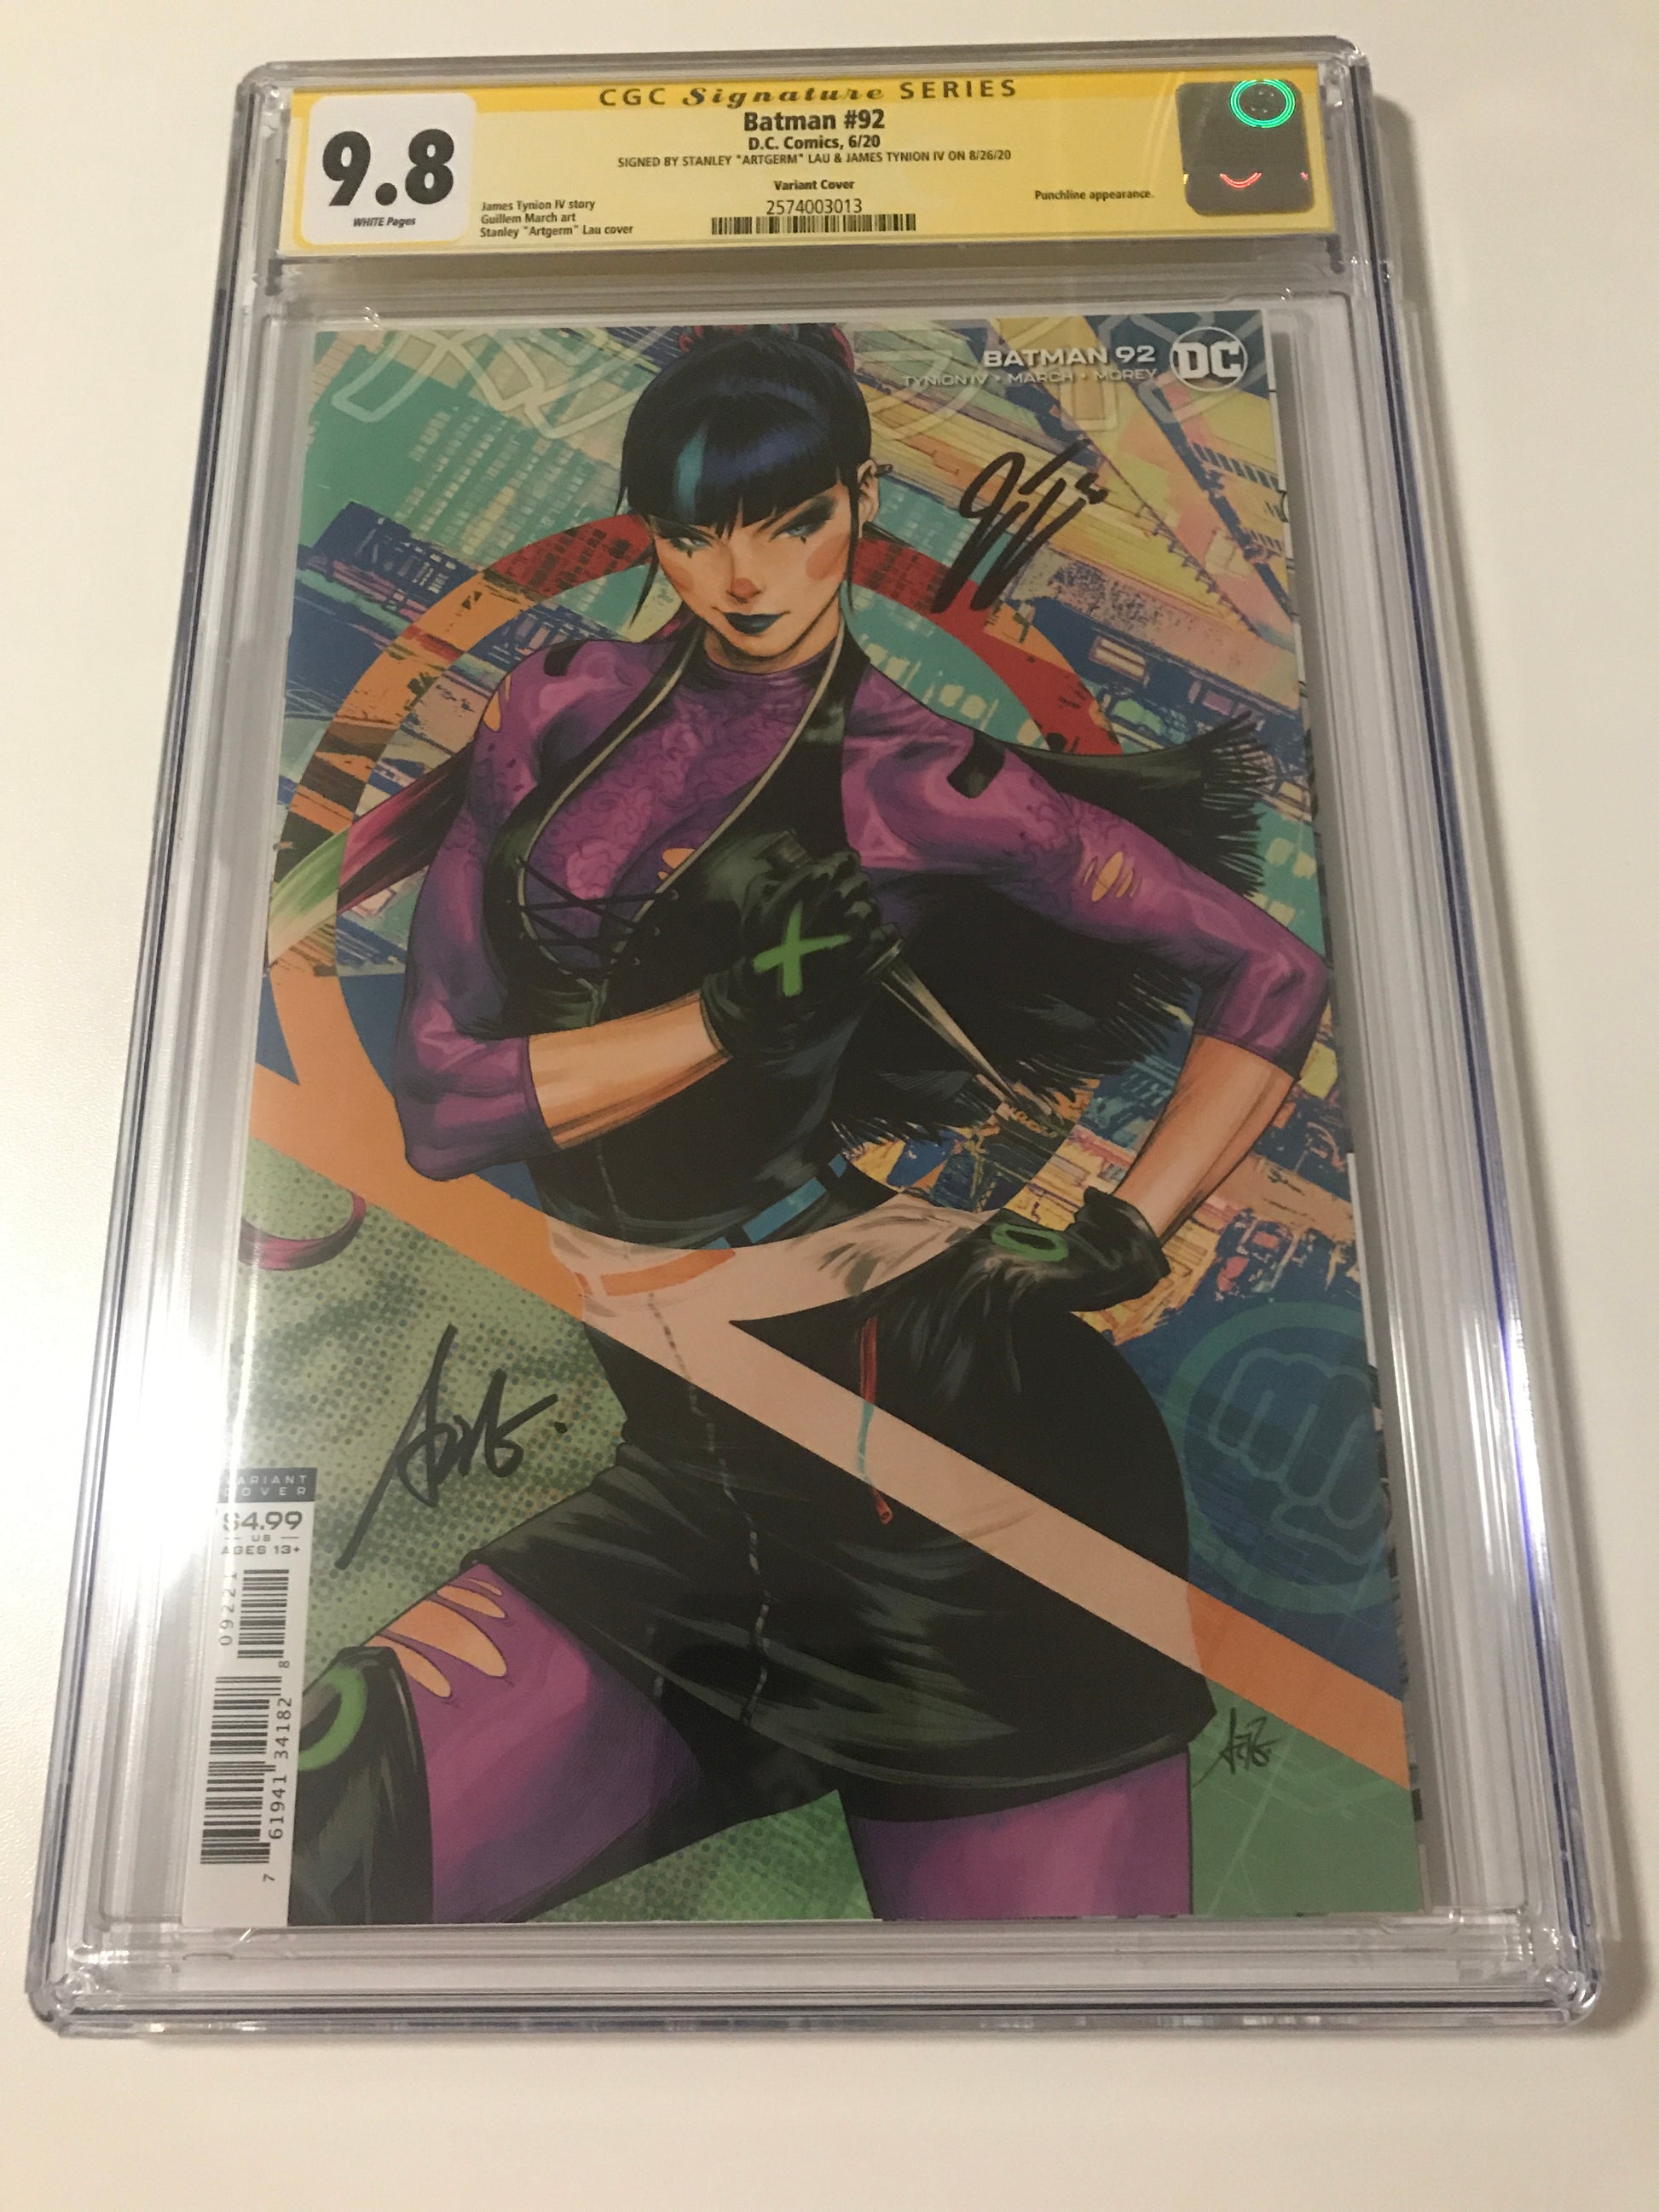 Batman 92 - CGC Signed By James Tynion IV & Artgerm - Heroes Cave